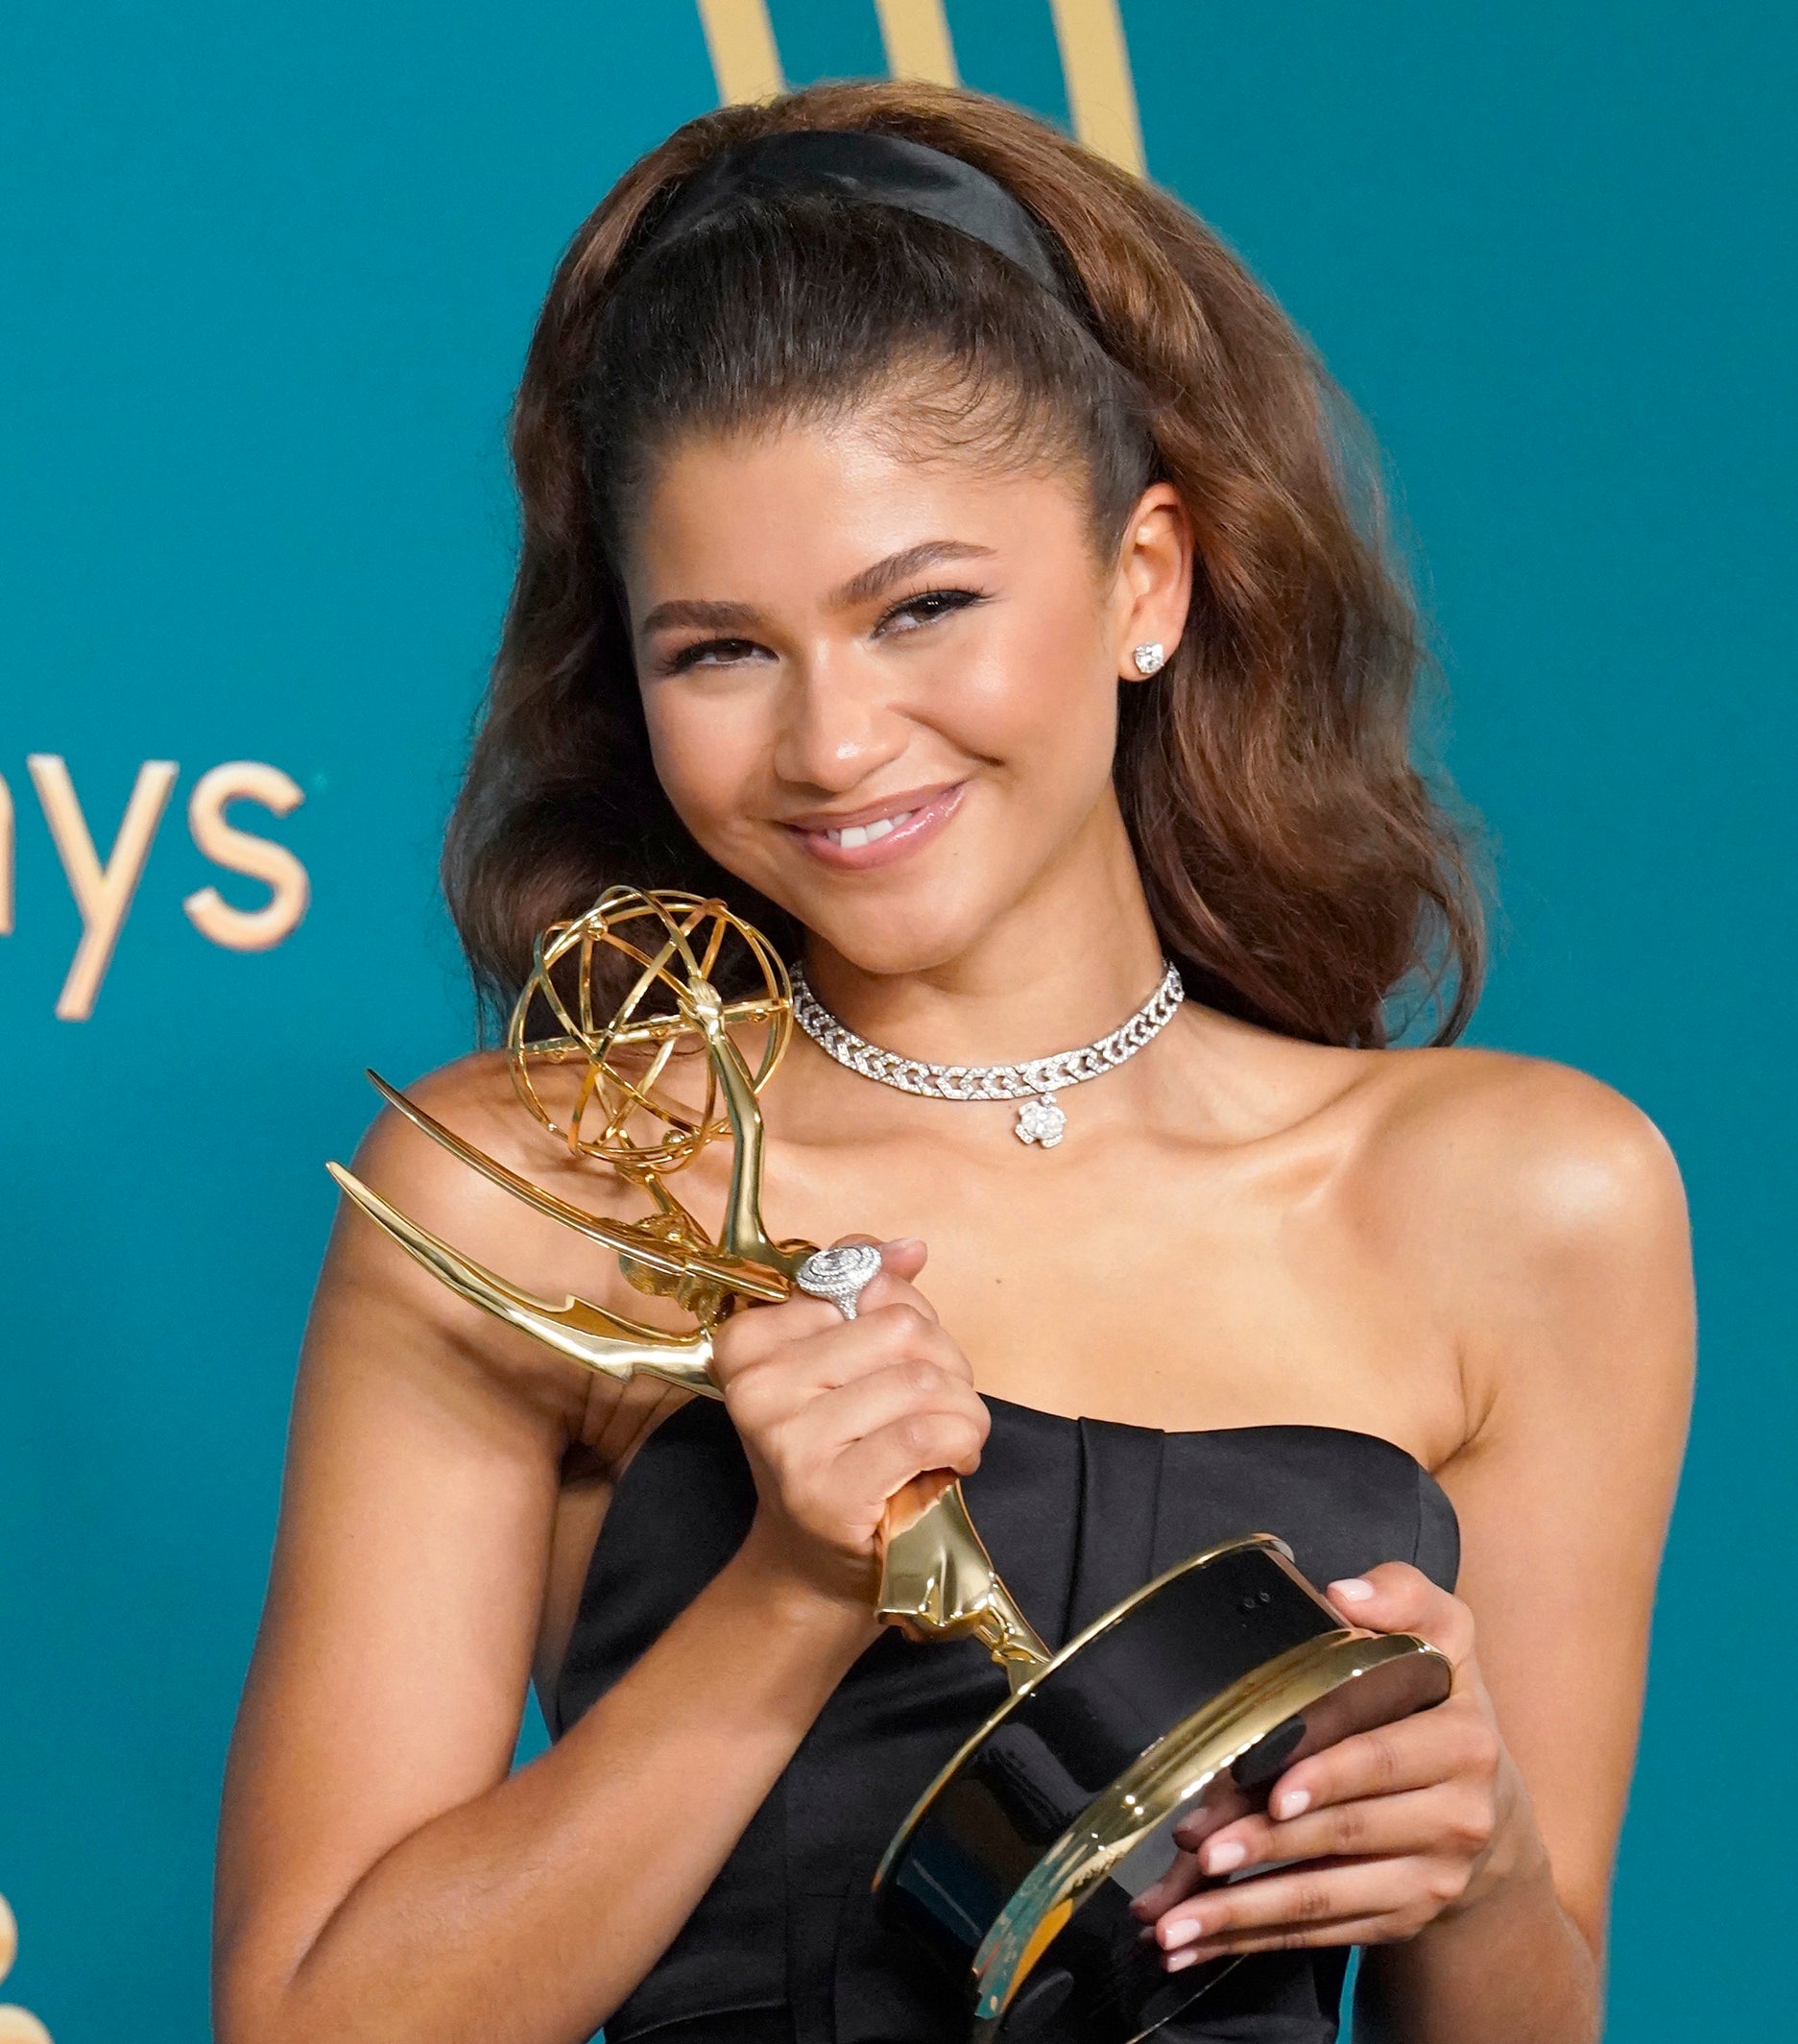 Zendaya in a strapless gown holding an Emmy award. She wears a silver necklace and has her hair in an updo